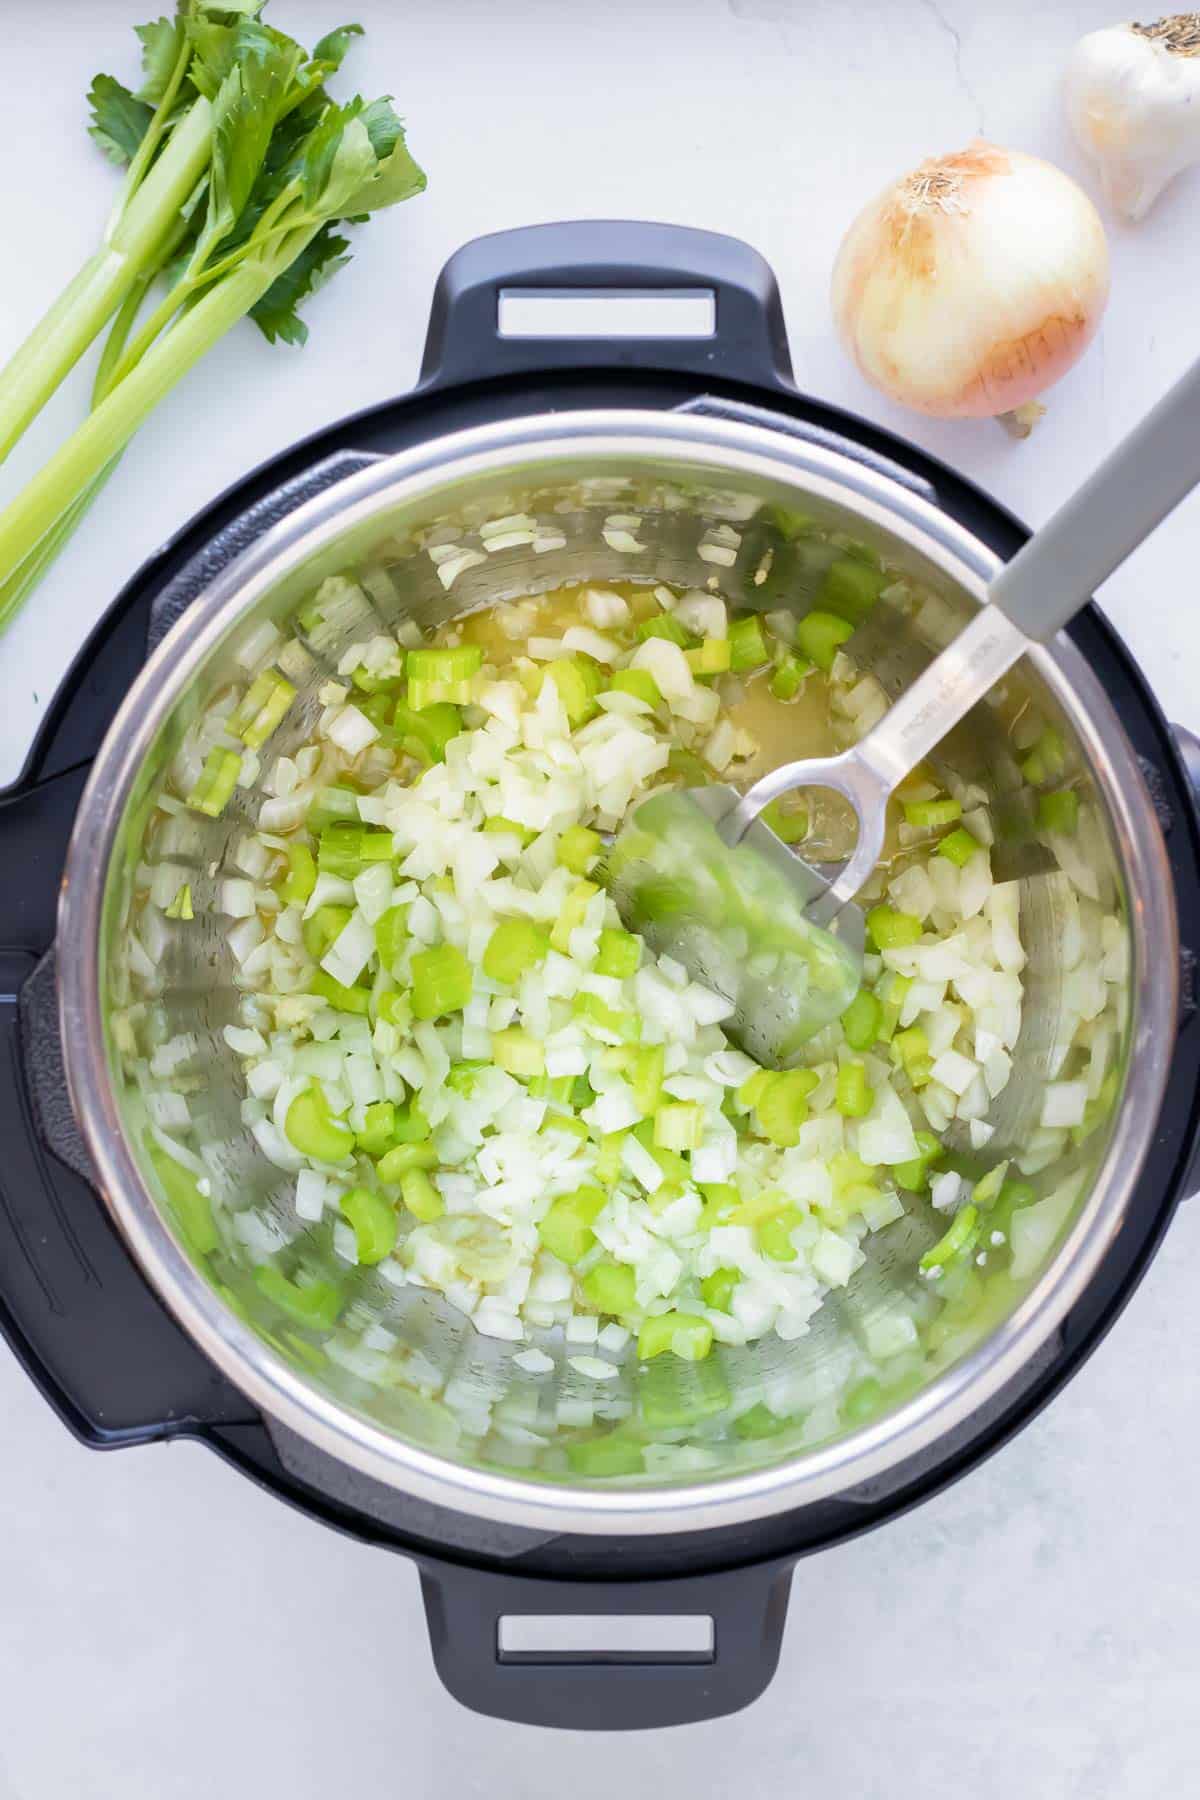 Onions and celery are added to the instant pot.